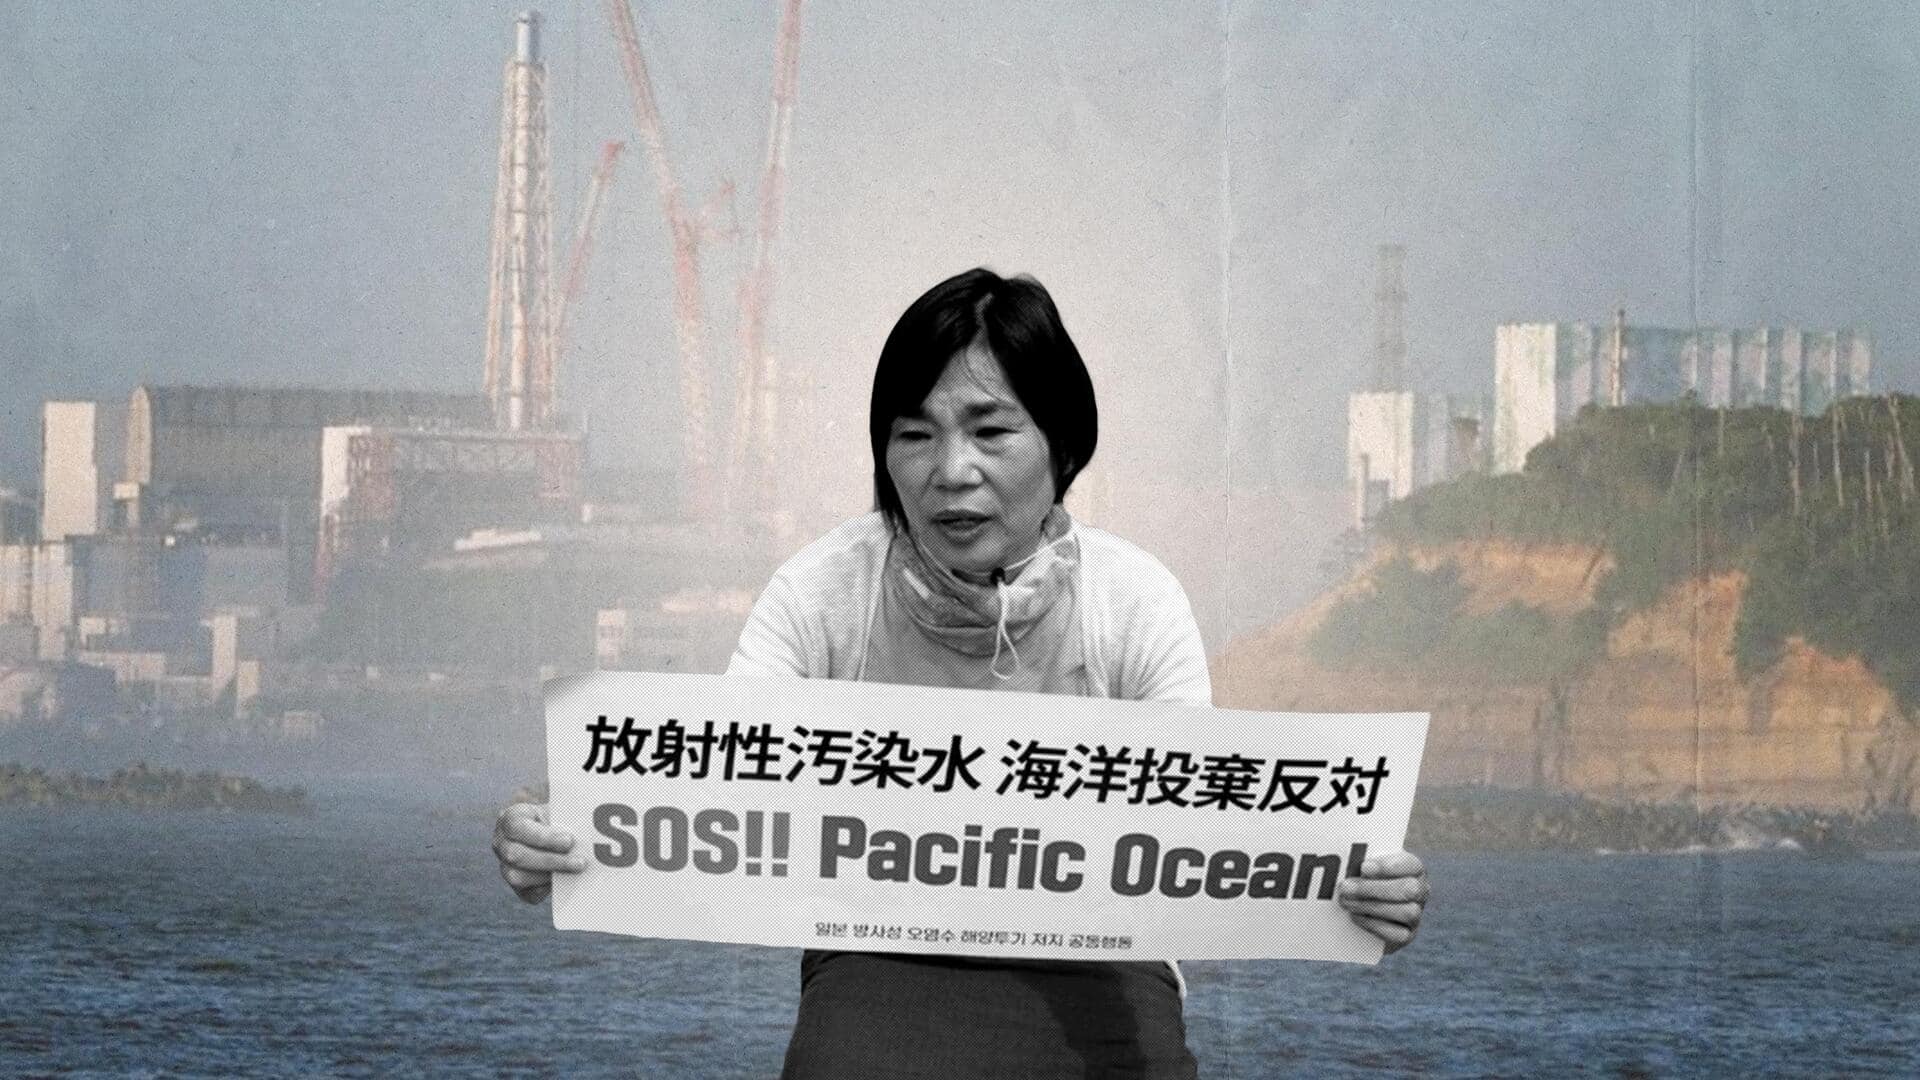 Why Japan is releasing radioactive wastewater into Pacific Ocean